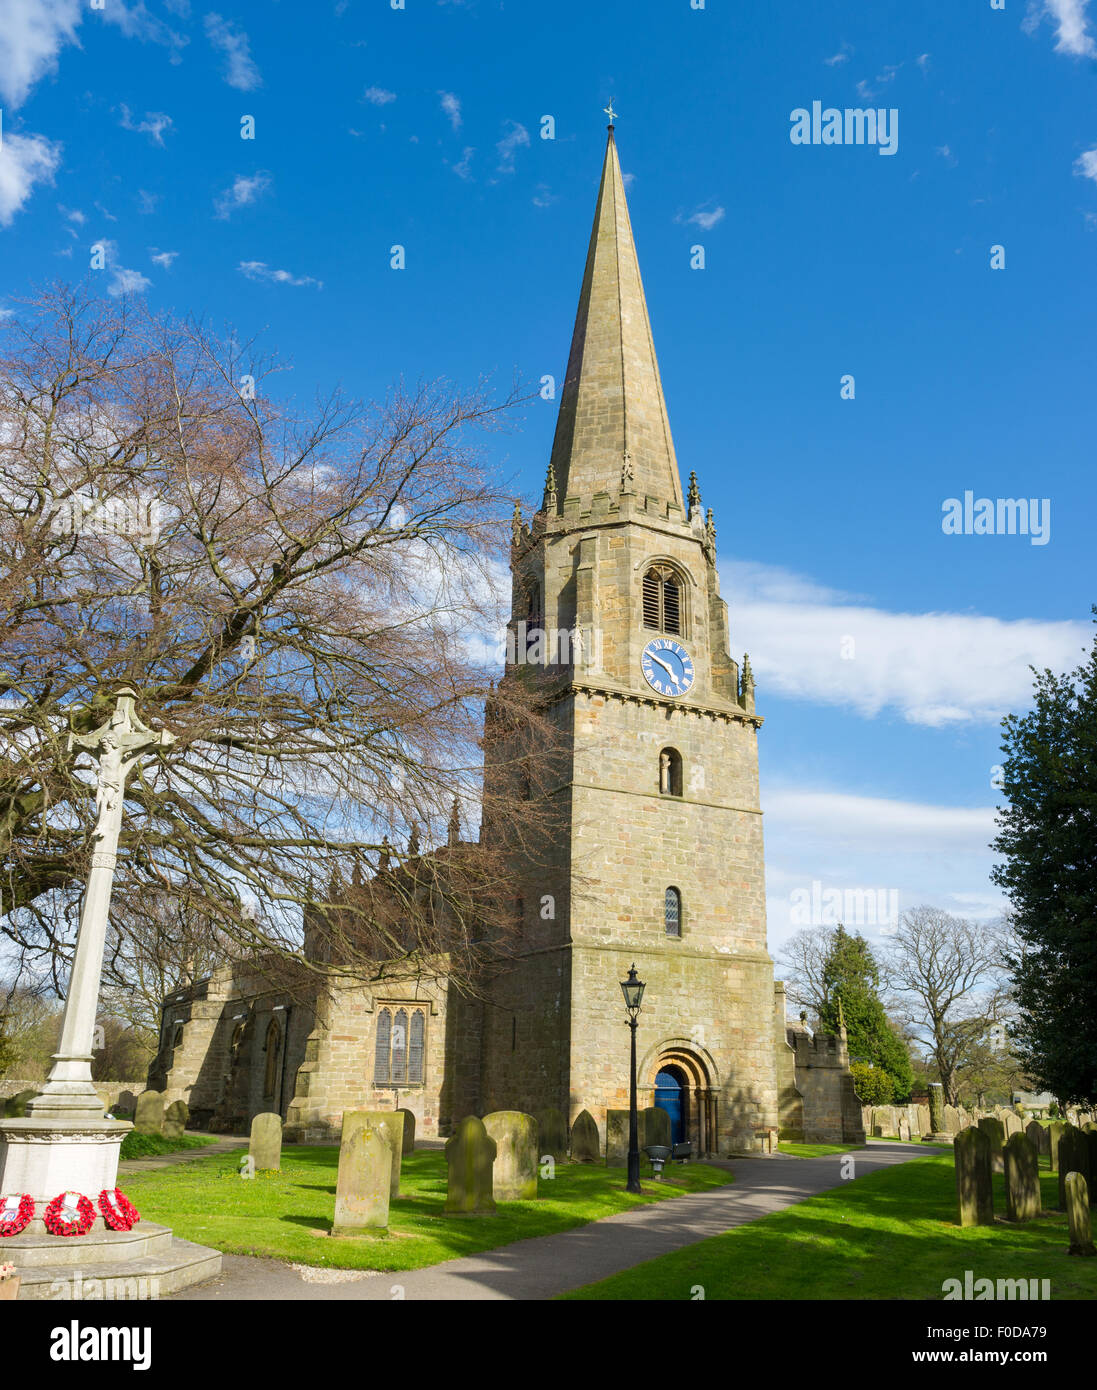 L'église St Mary vierge, Masham, North Yorkshire, Angleterre Banque D'Images